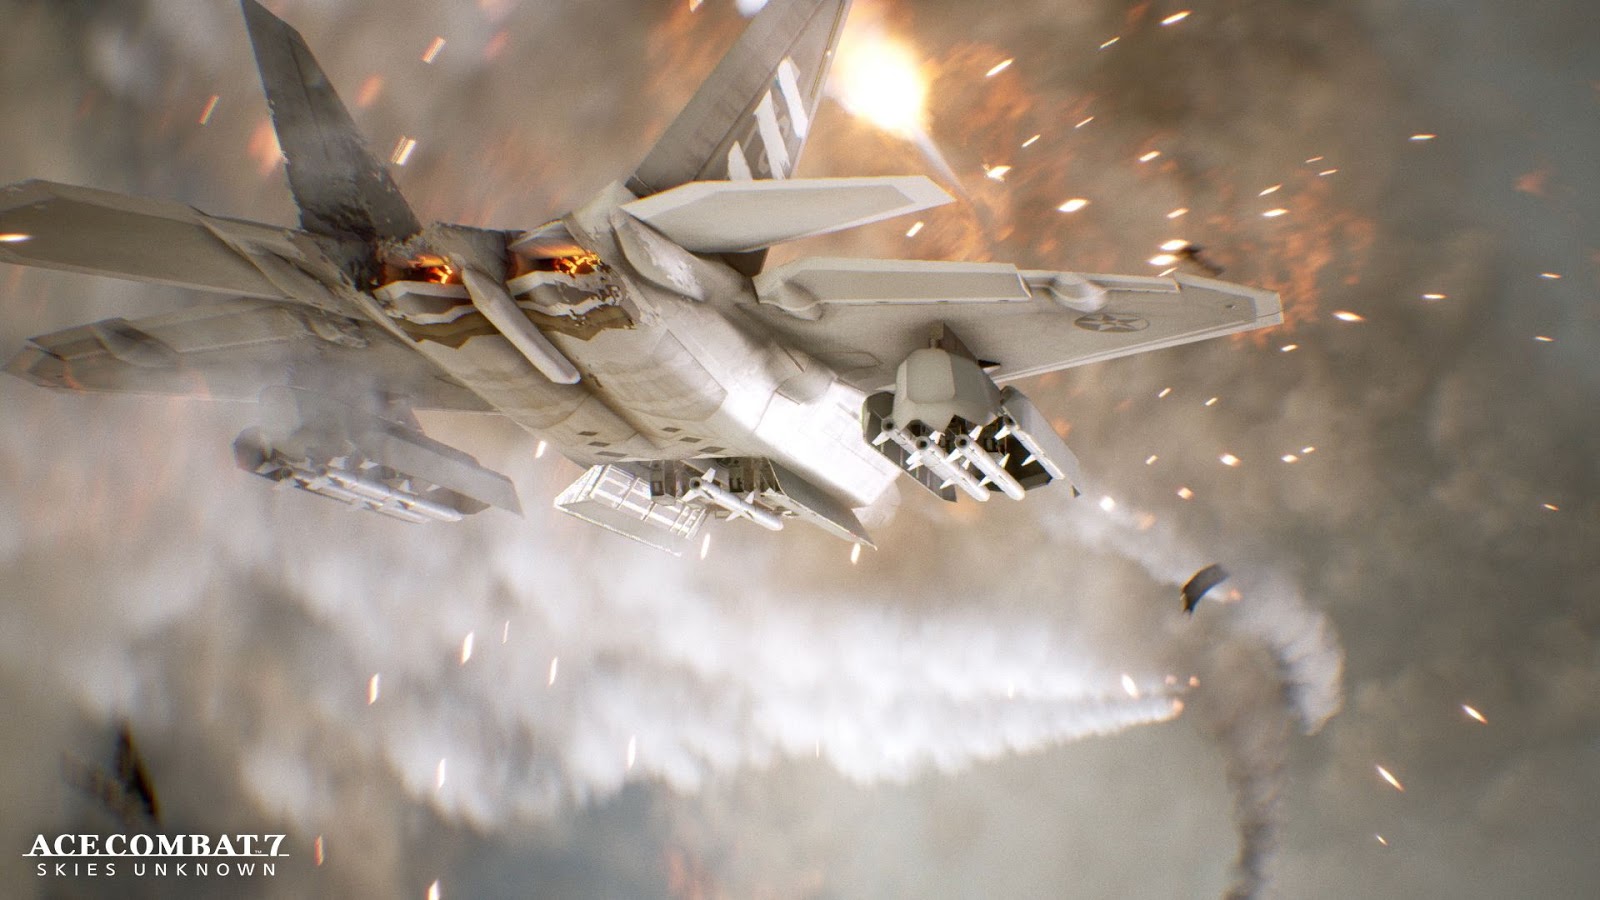 "ACE COMBAT 7 delivers the culmination of 20 years of aerial combat ga...